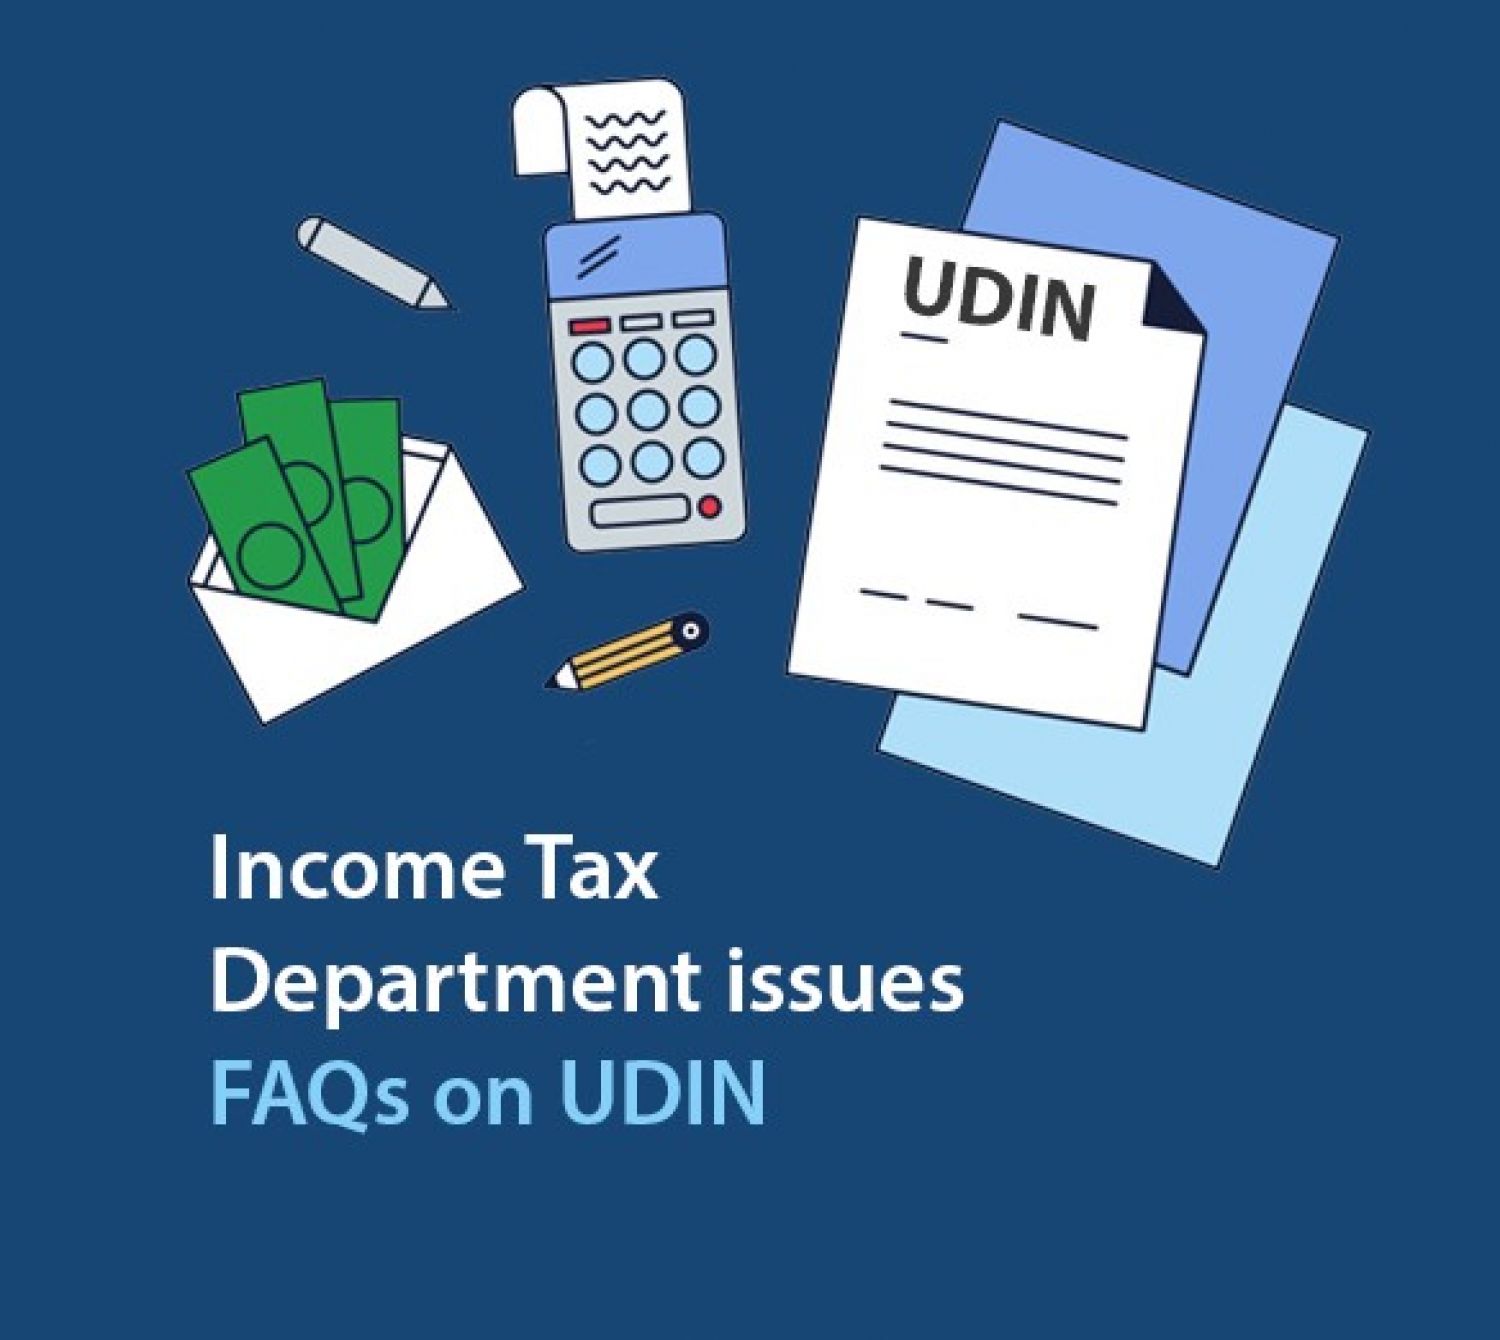 Frequently asked questions (FAQ) on UDIN issued by the income tax department